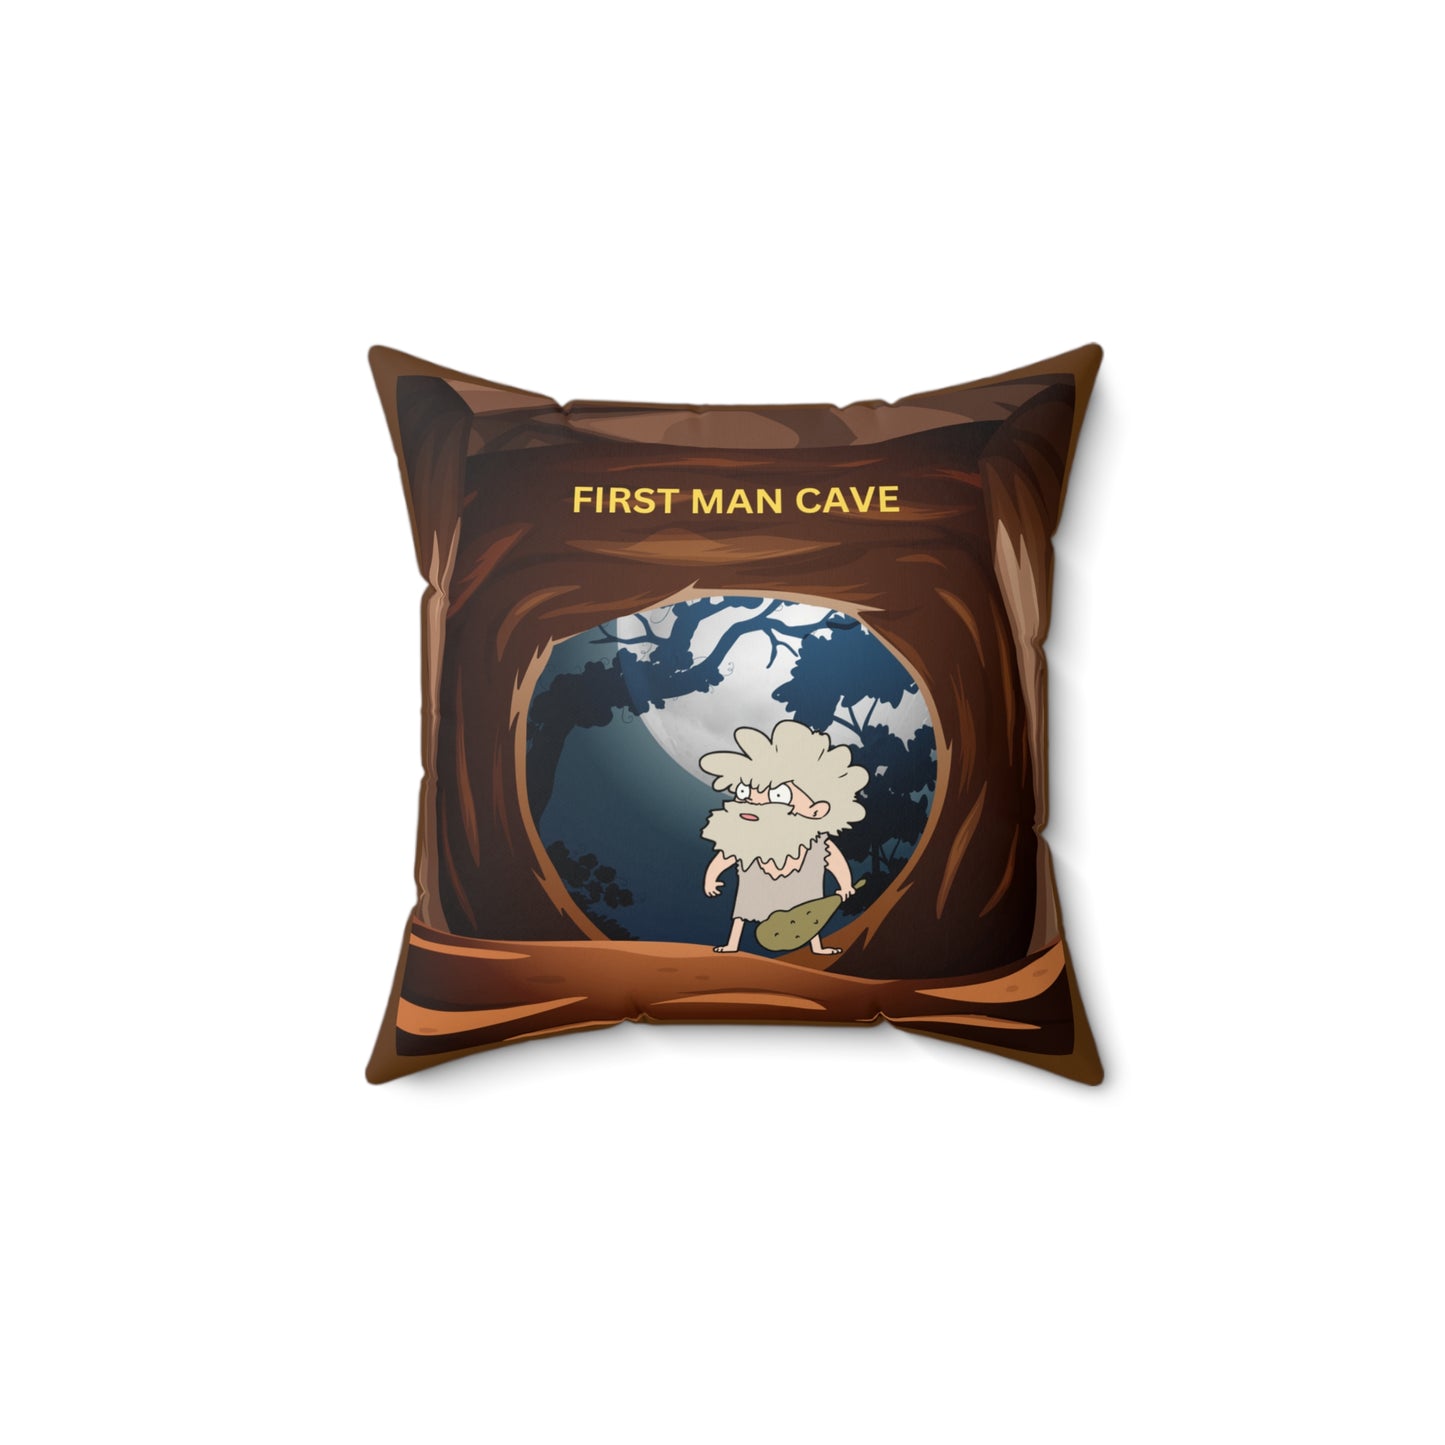 DAD - First Man Cave Square Pillow